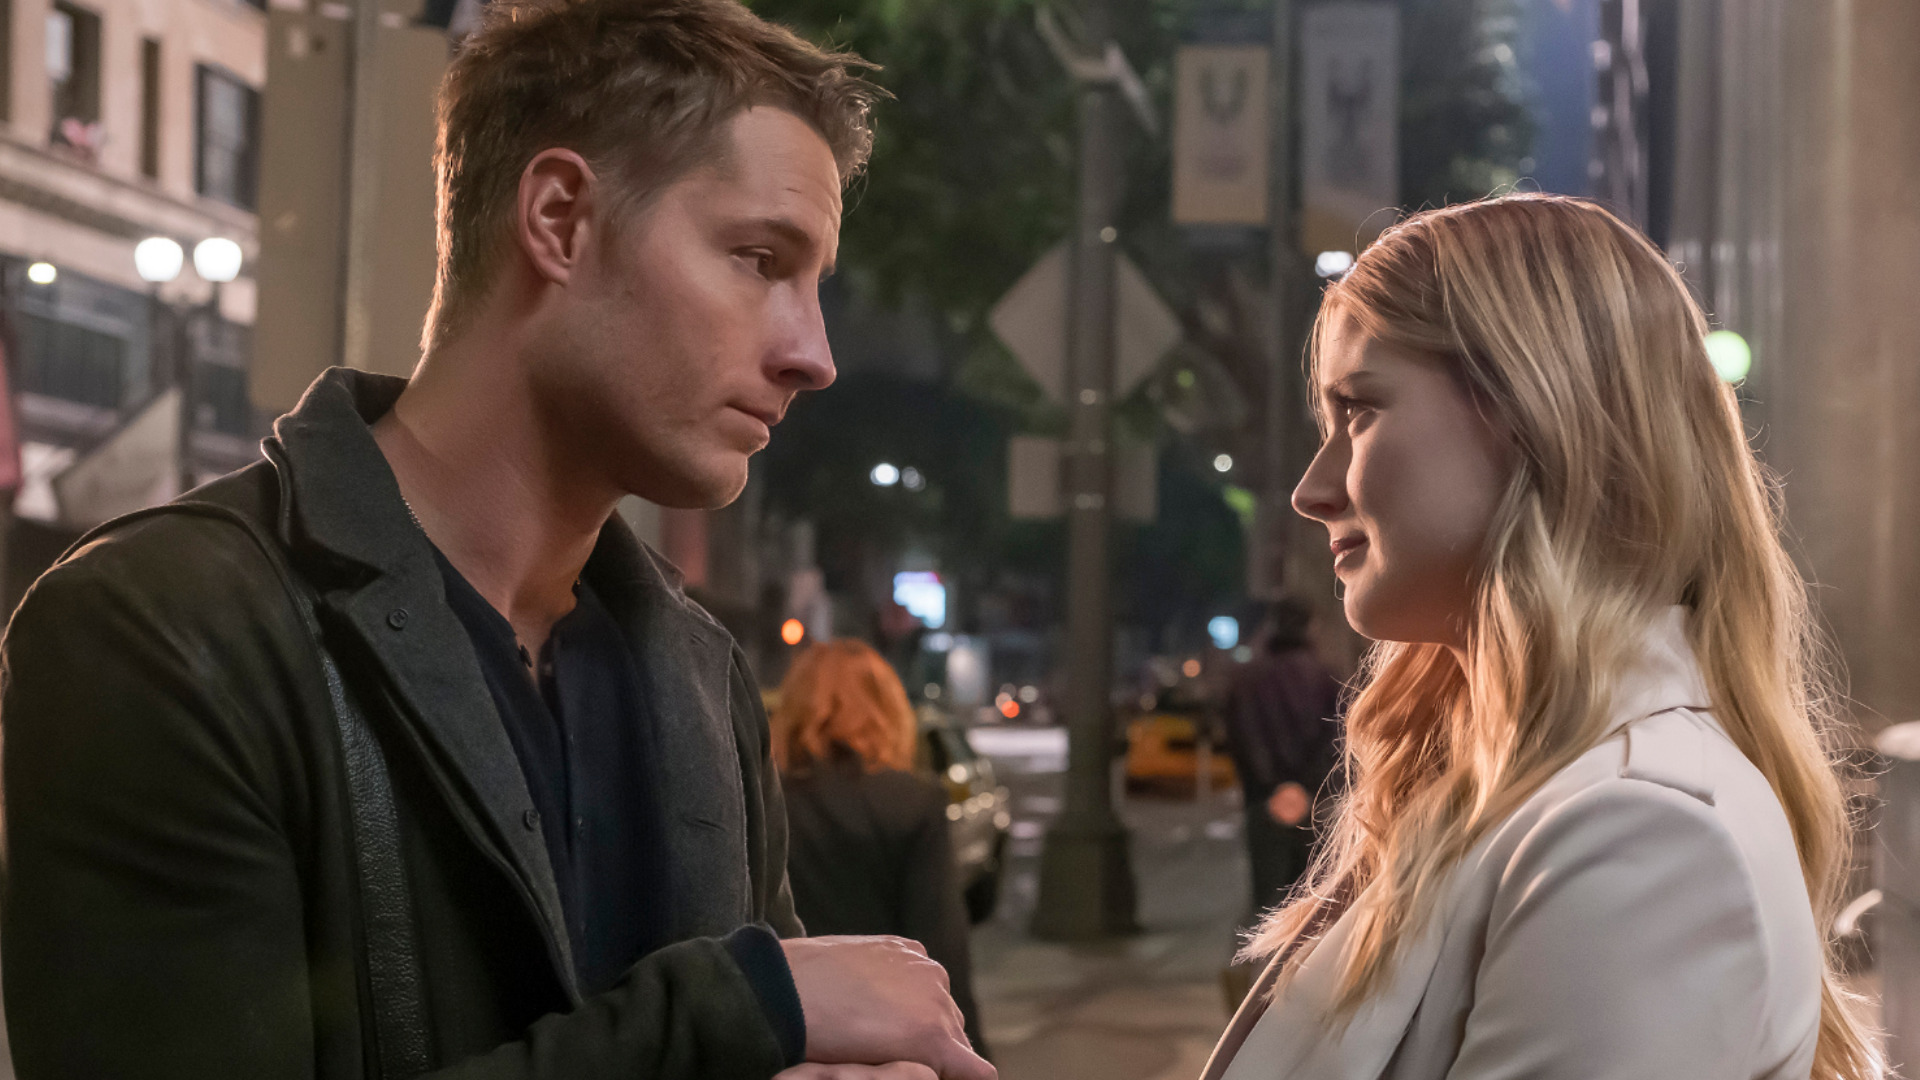 Justin Hartley as Kevin and Alexandra Breckenridge as Sophie look at each other in ‘This Is Us’ Season 1 Episode 17